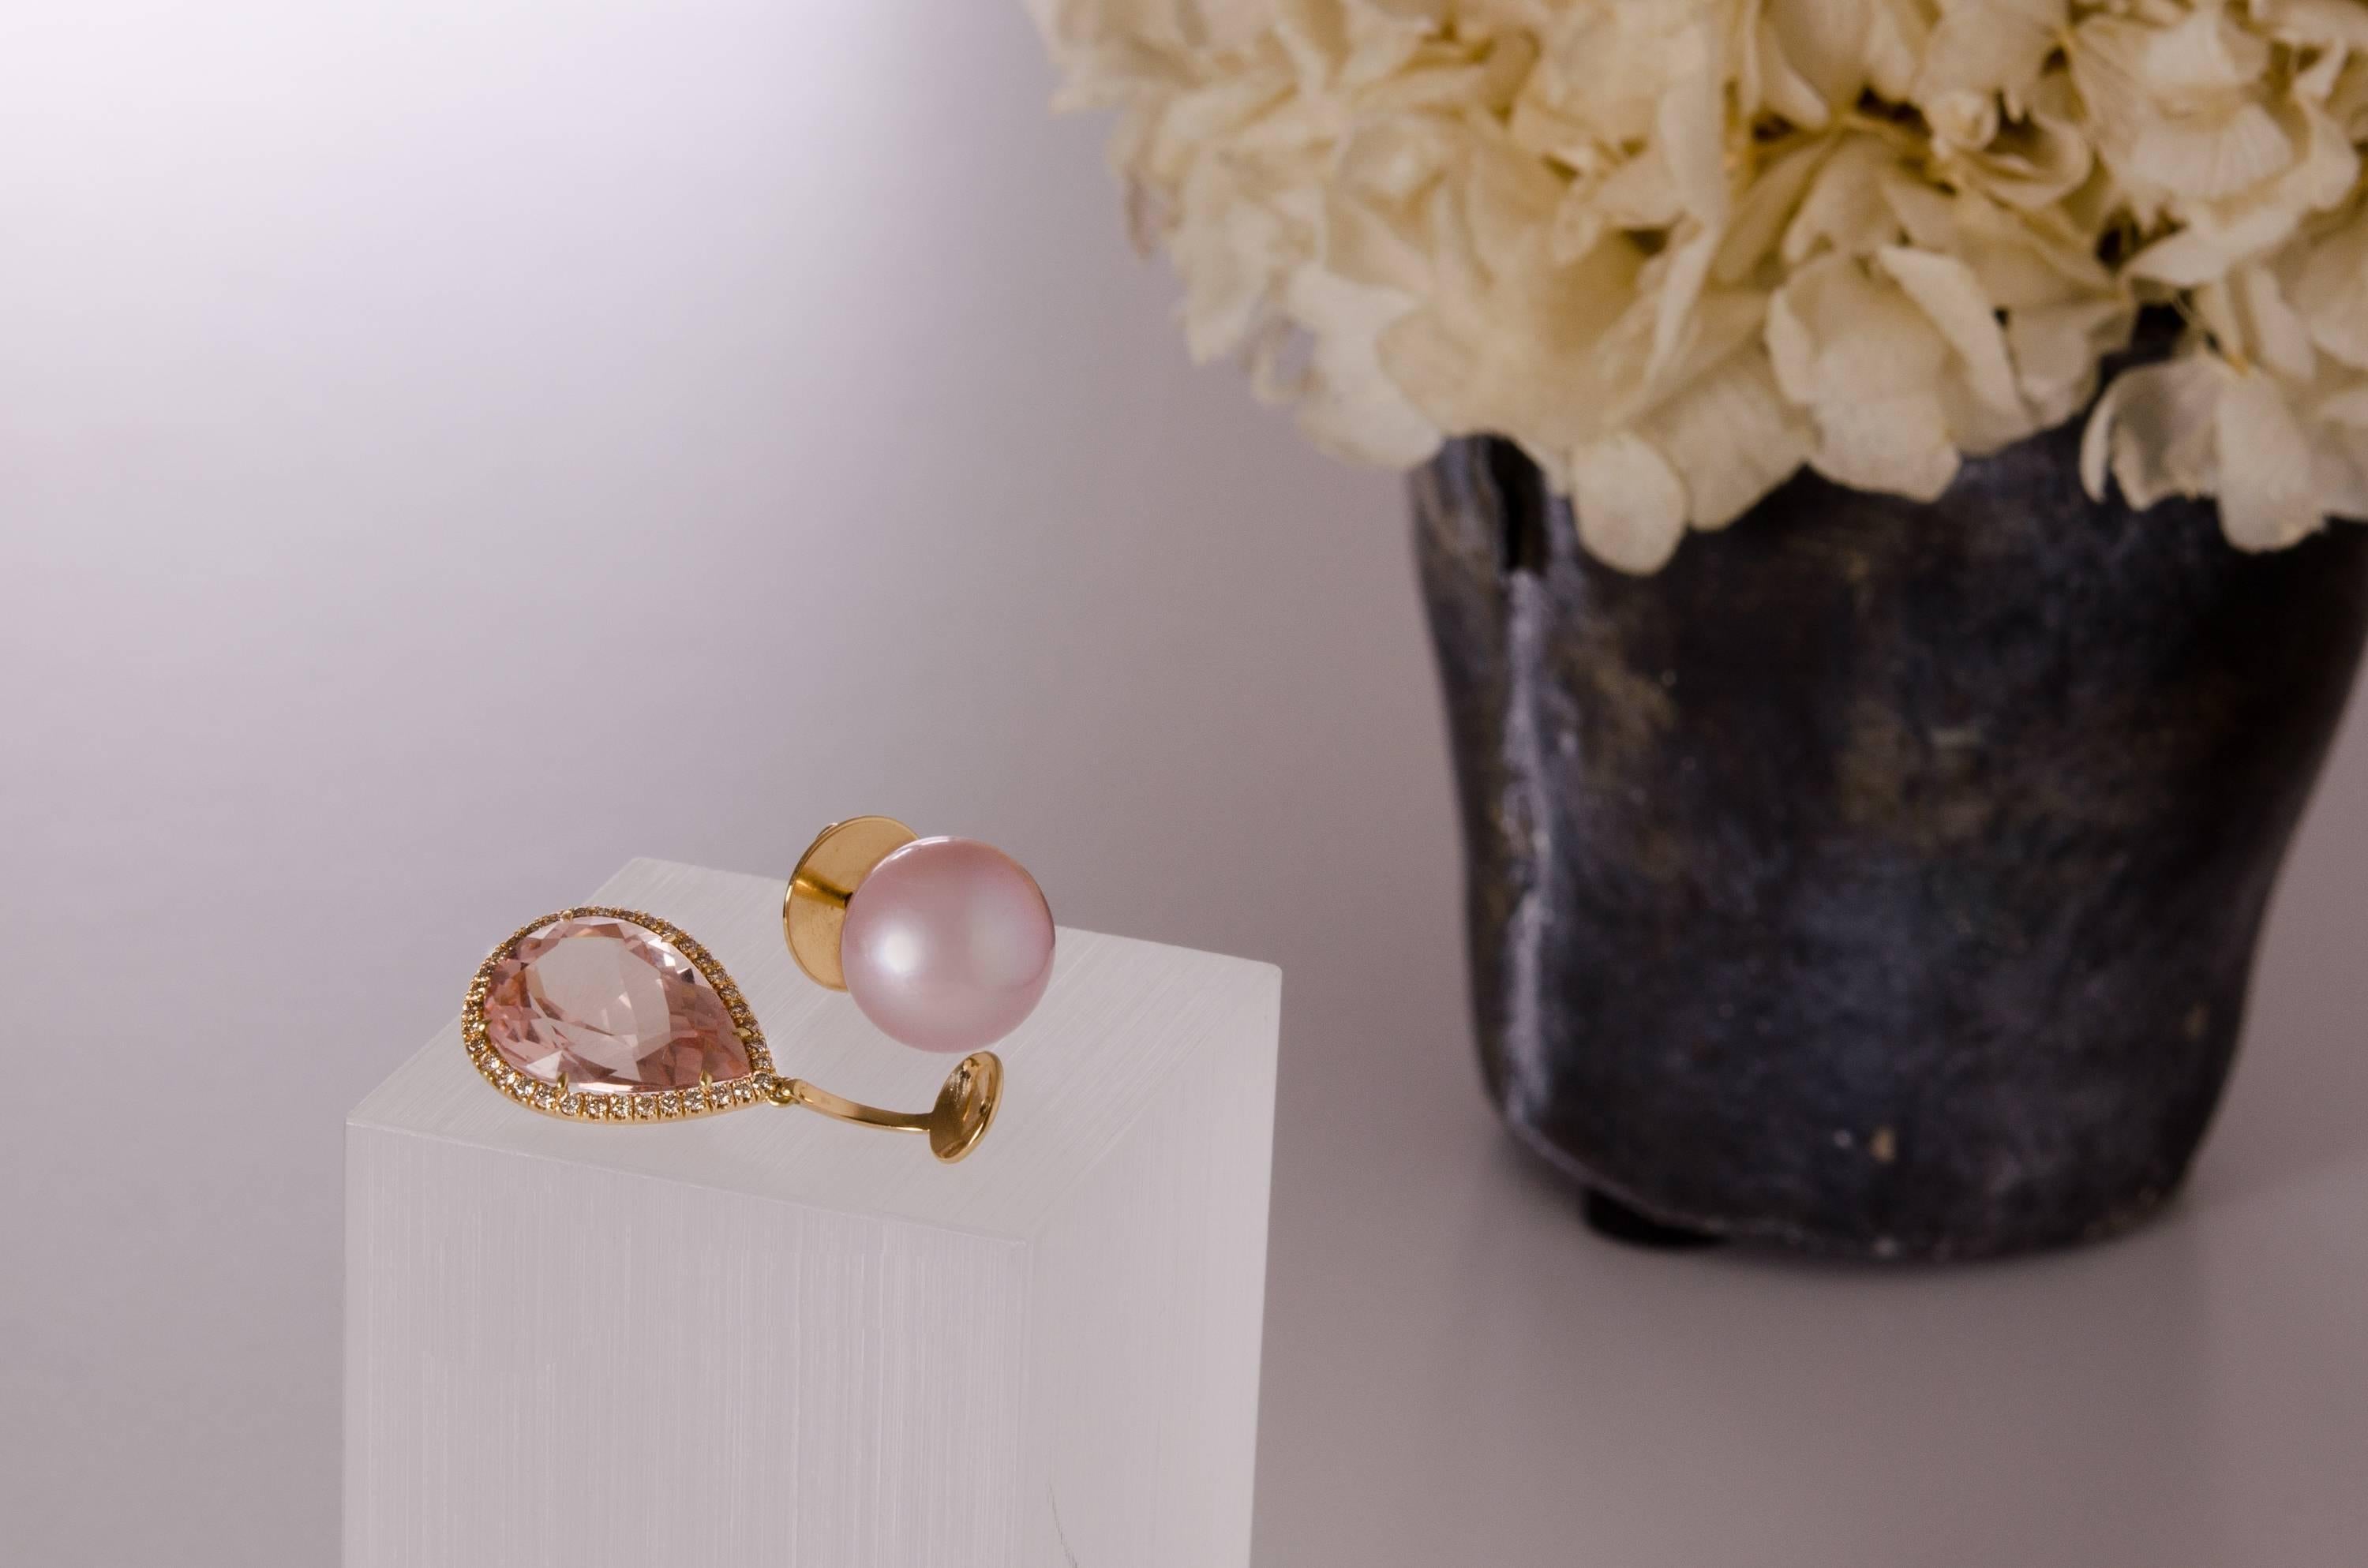 These one-off earrings are handmade in Switzerland. The earrings are made in 18K rose gold (4N) with two pink freshwater pearls (11.7mm) and detachable pear shaped Morganites of together 12.36 ct. in entourage of 70 8/8 Swiss cut champagne Diamonds